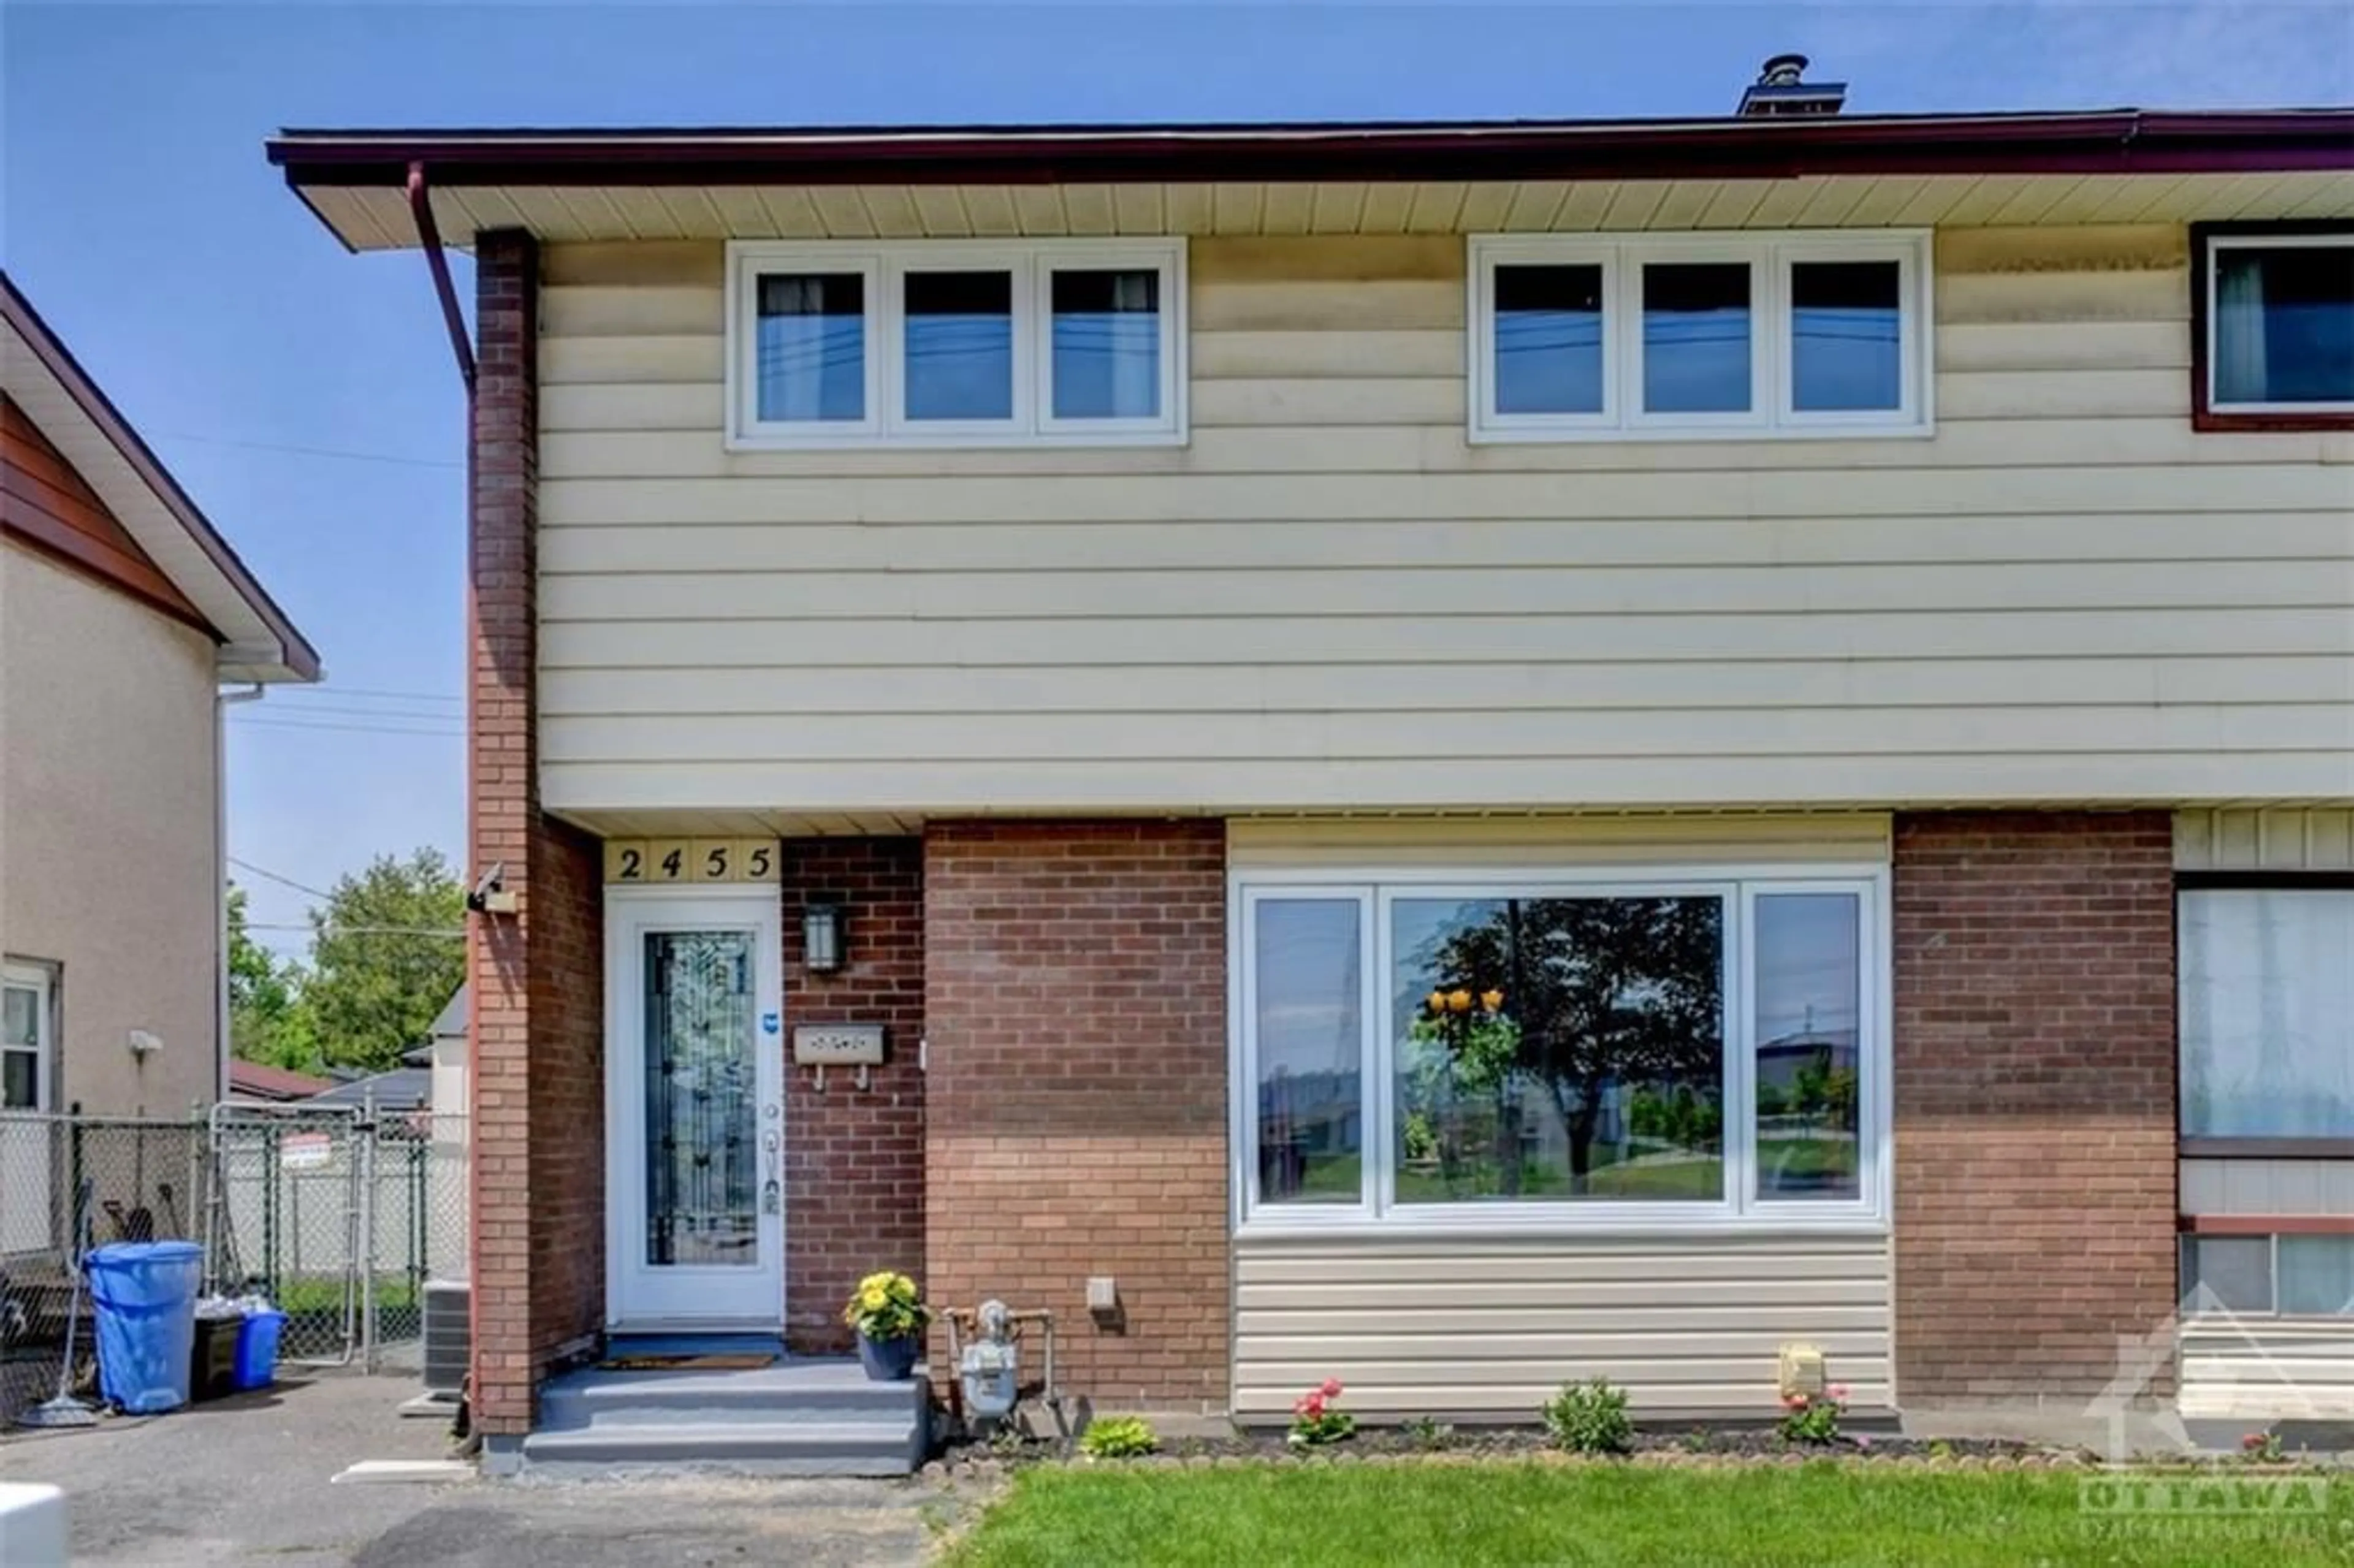 Home with brick exterior material for 2455 WALKLEY Rd, Ottawa Ontario K1G 3H1